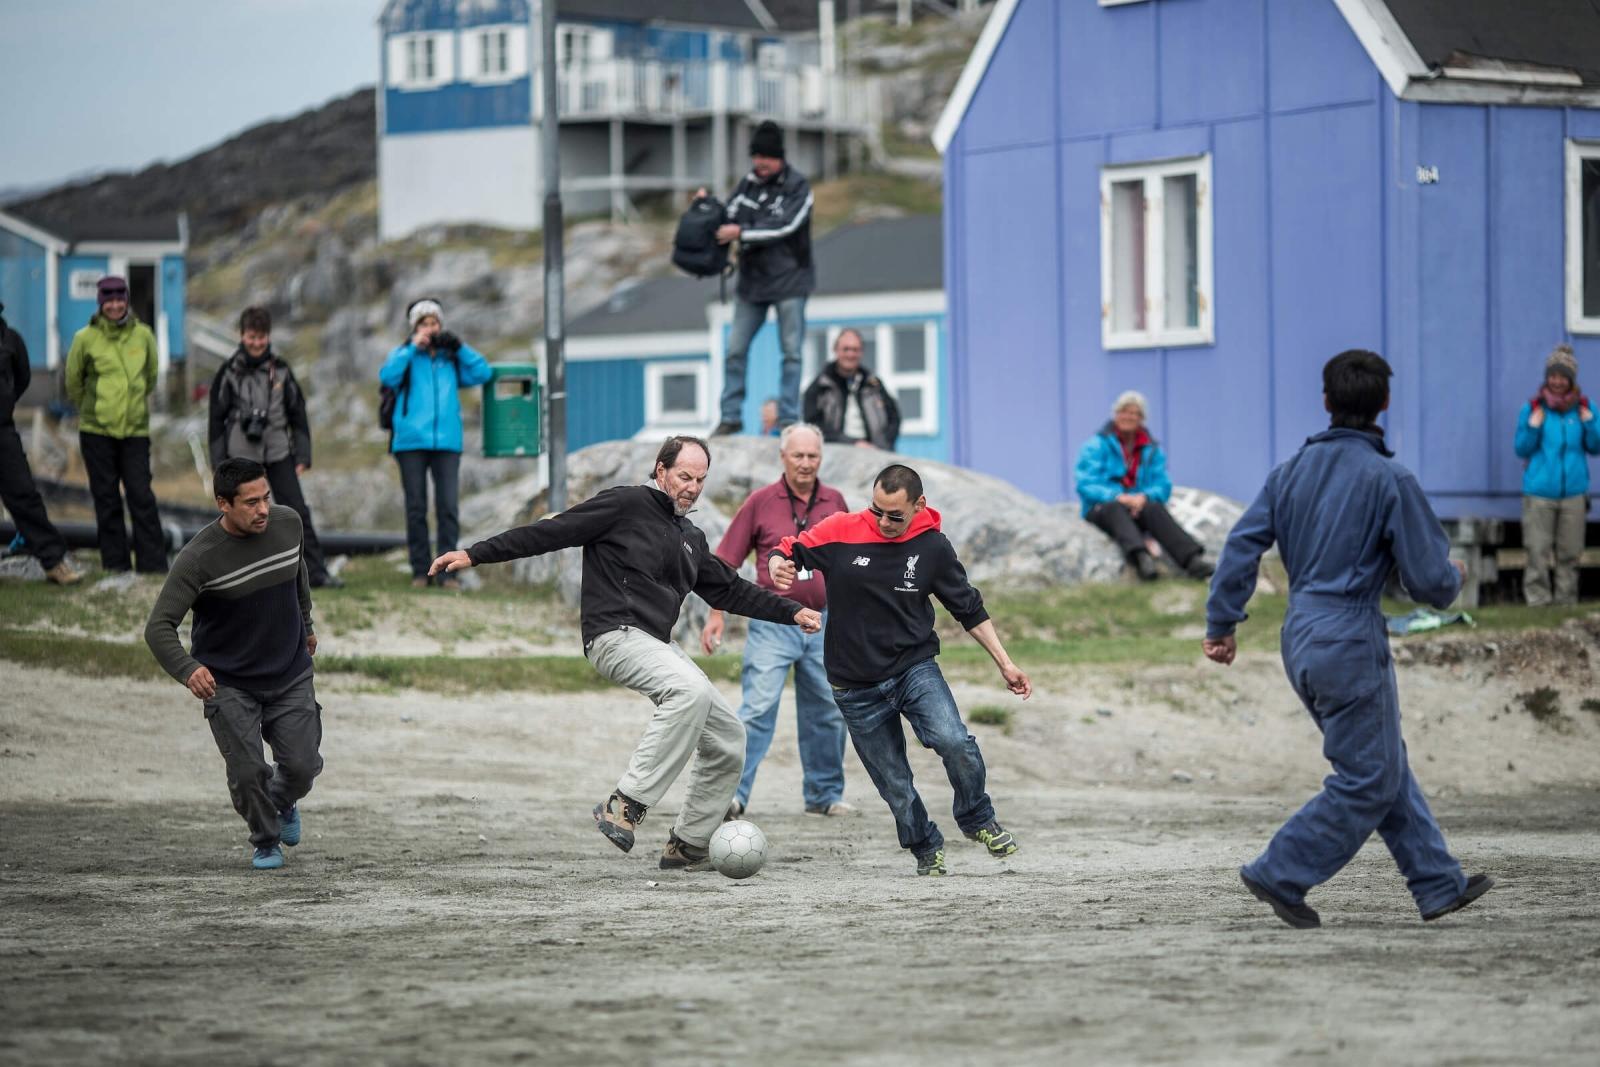 A game of soccer between cruise guests and Itilleq locals in Greenland. Photo by Mads Pihl